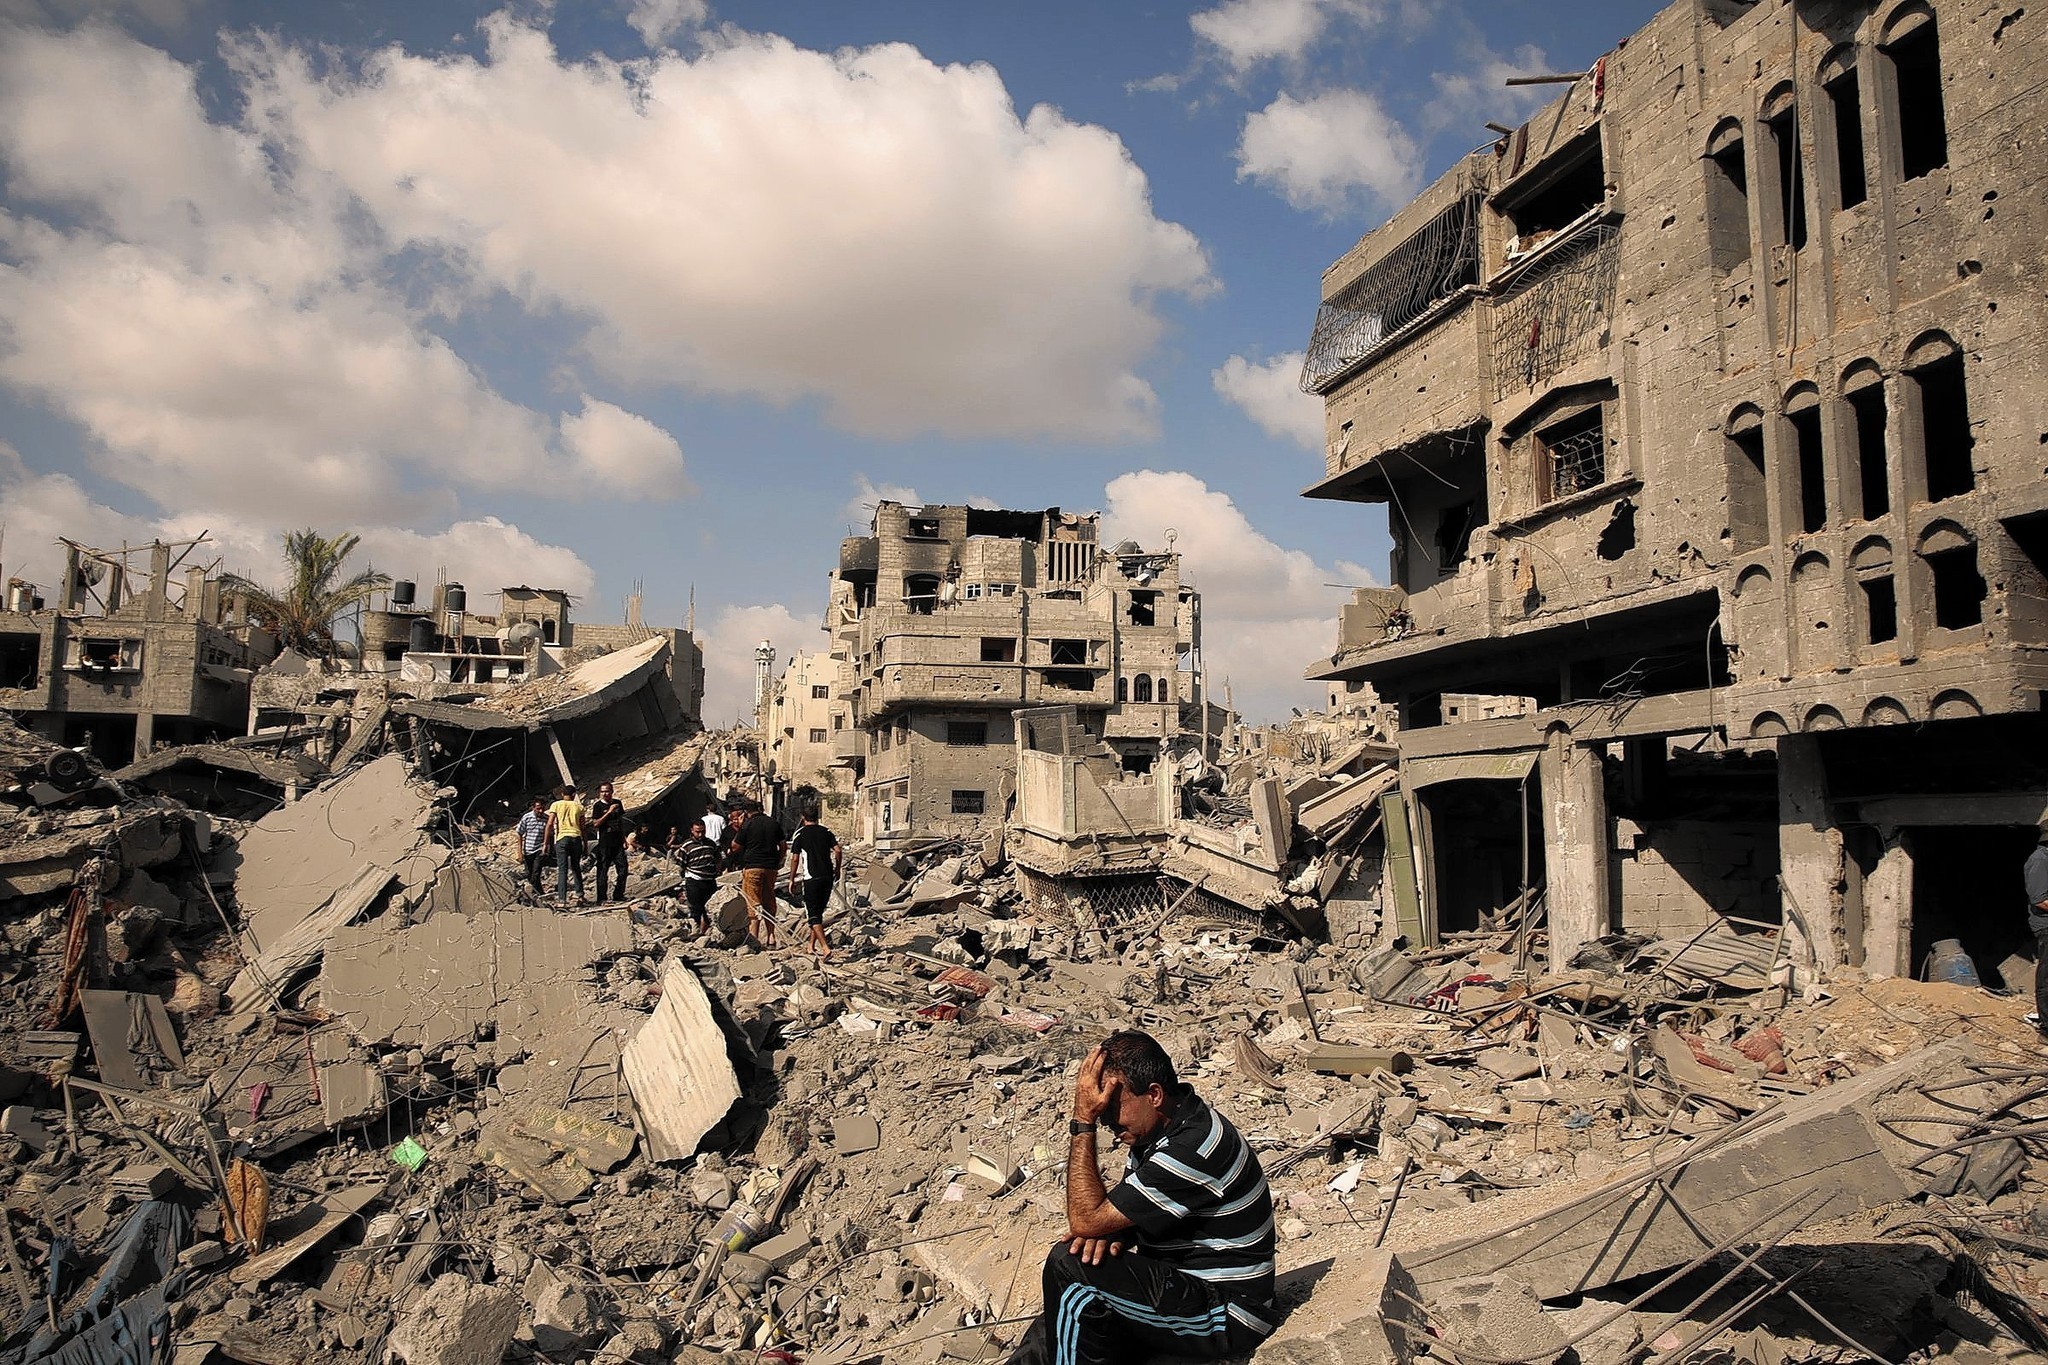 gaza-residents-find-130-bodies-during-cease-fire-la-times